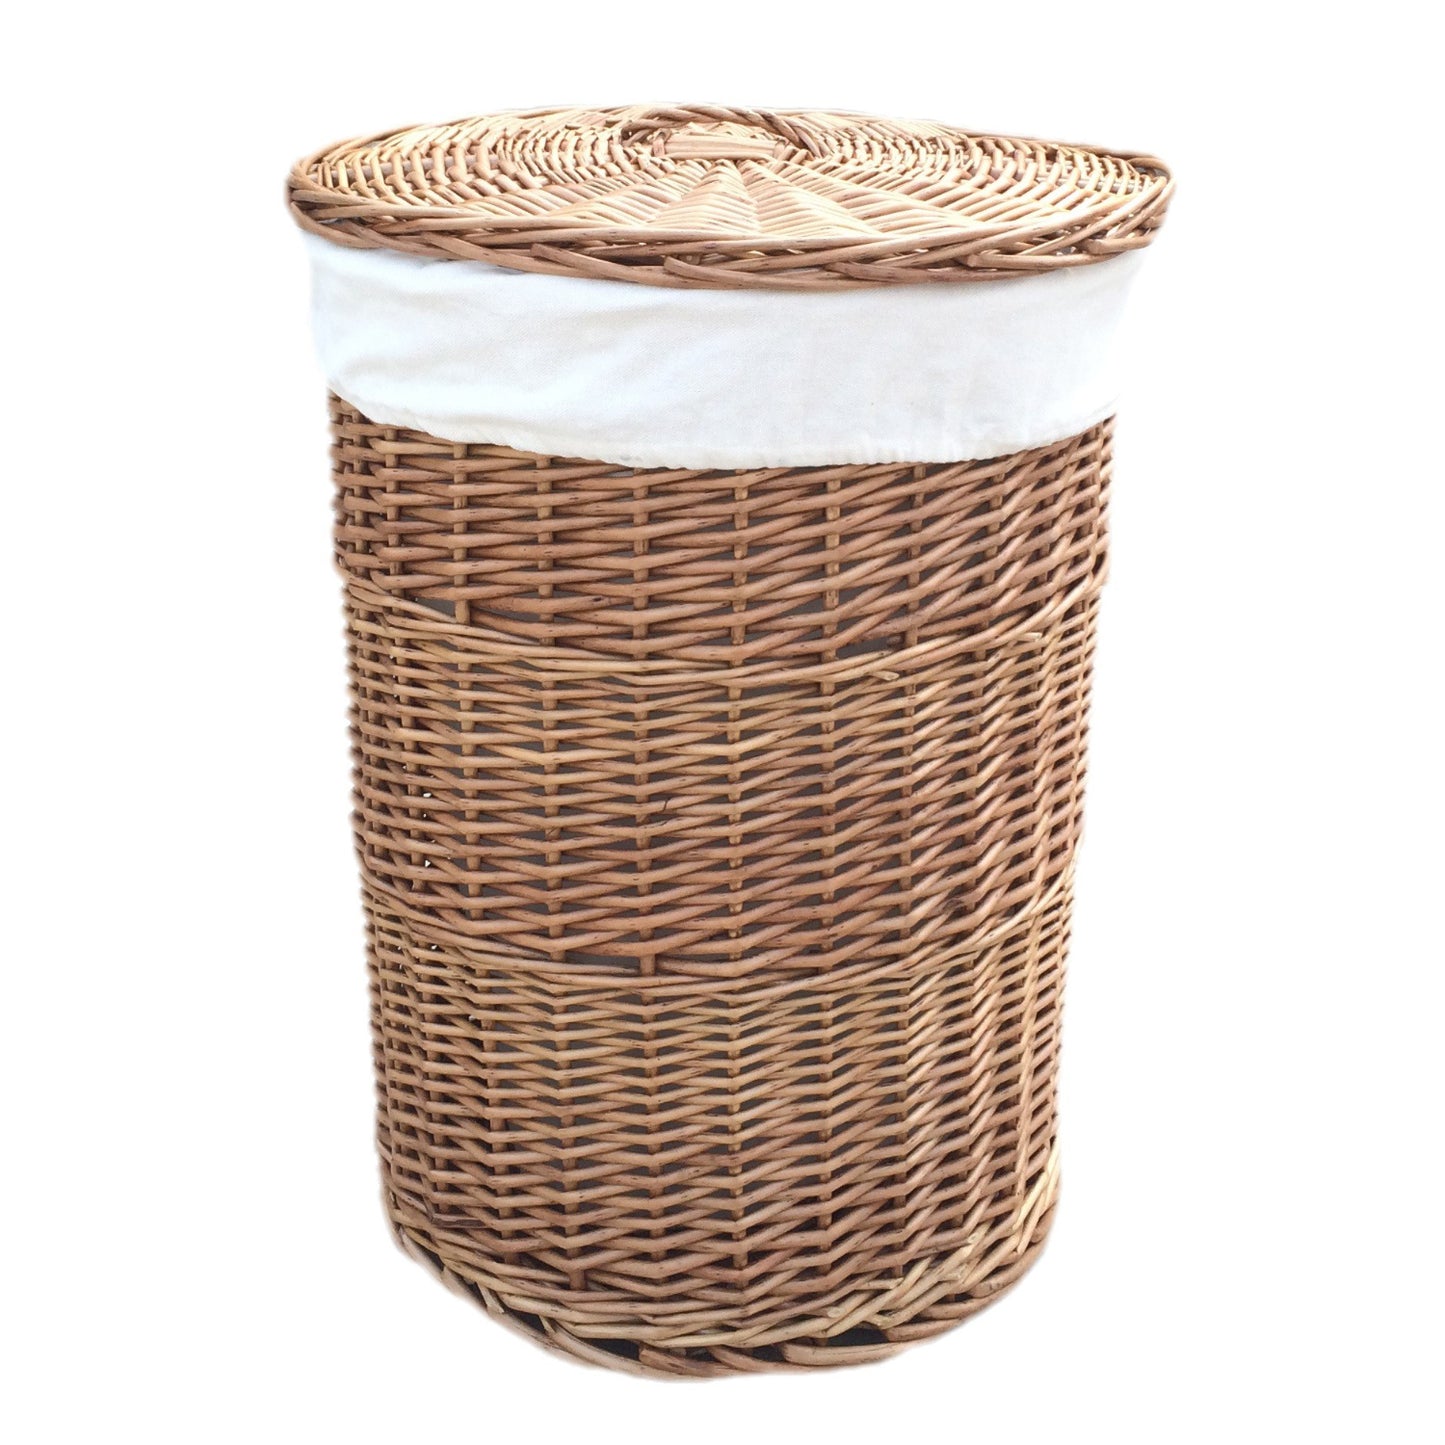 Large Light Steamed Round Linen Basket With White Lining